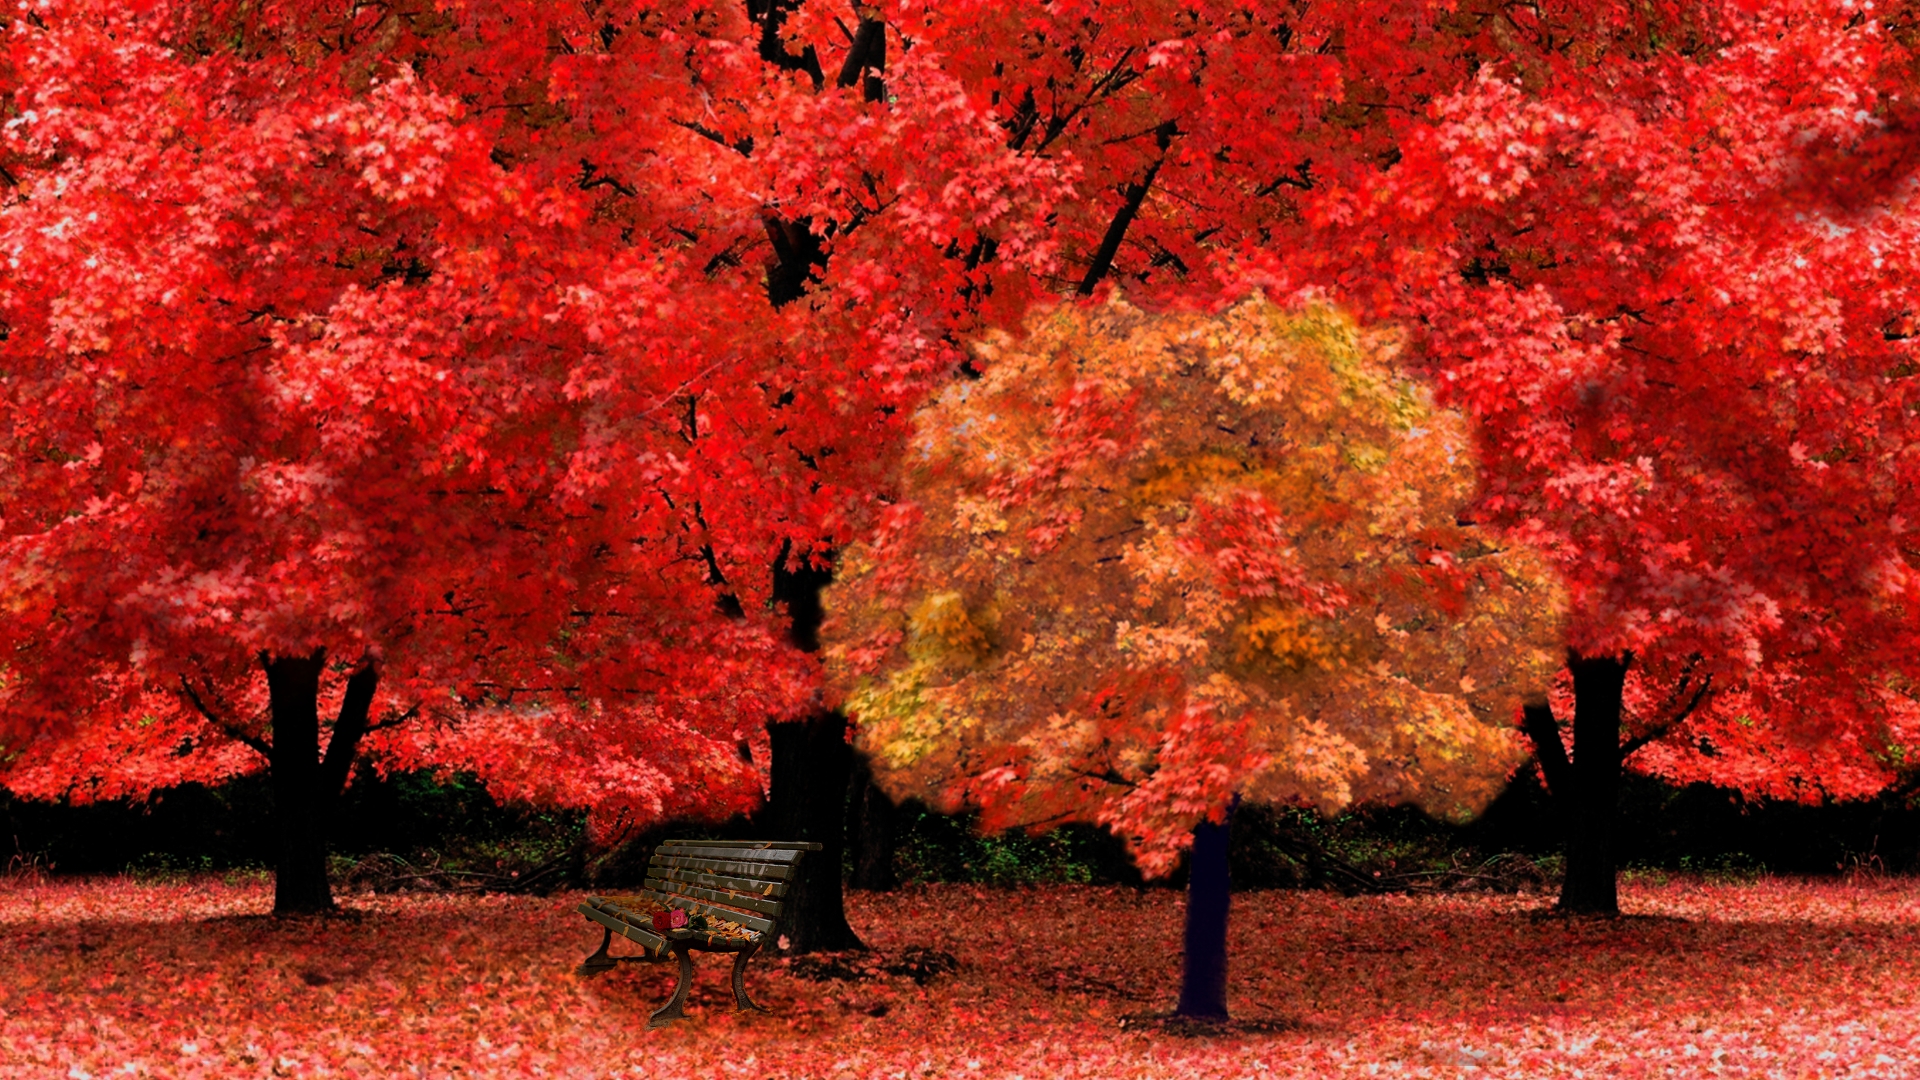 Red Autumn Leaves Wallpaper High Definition Quality